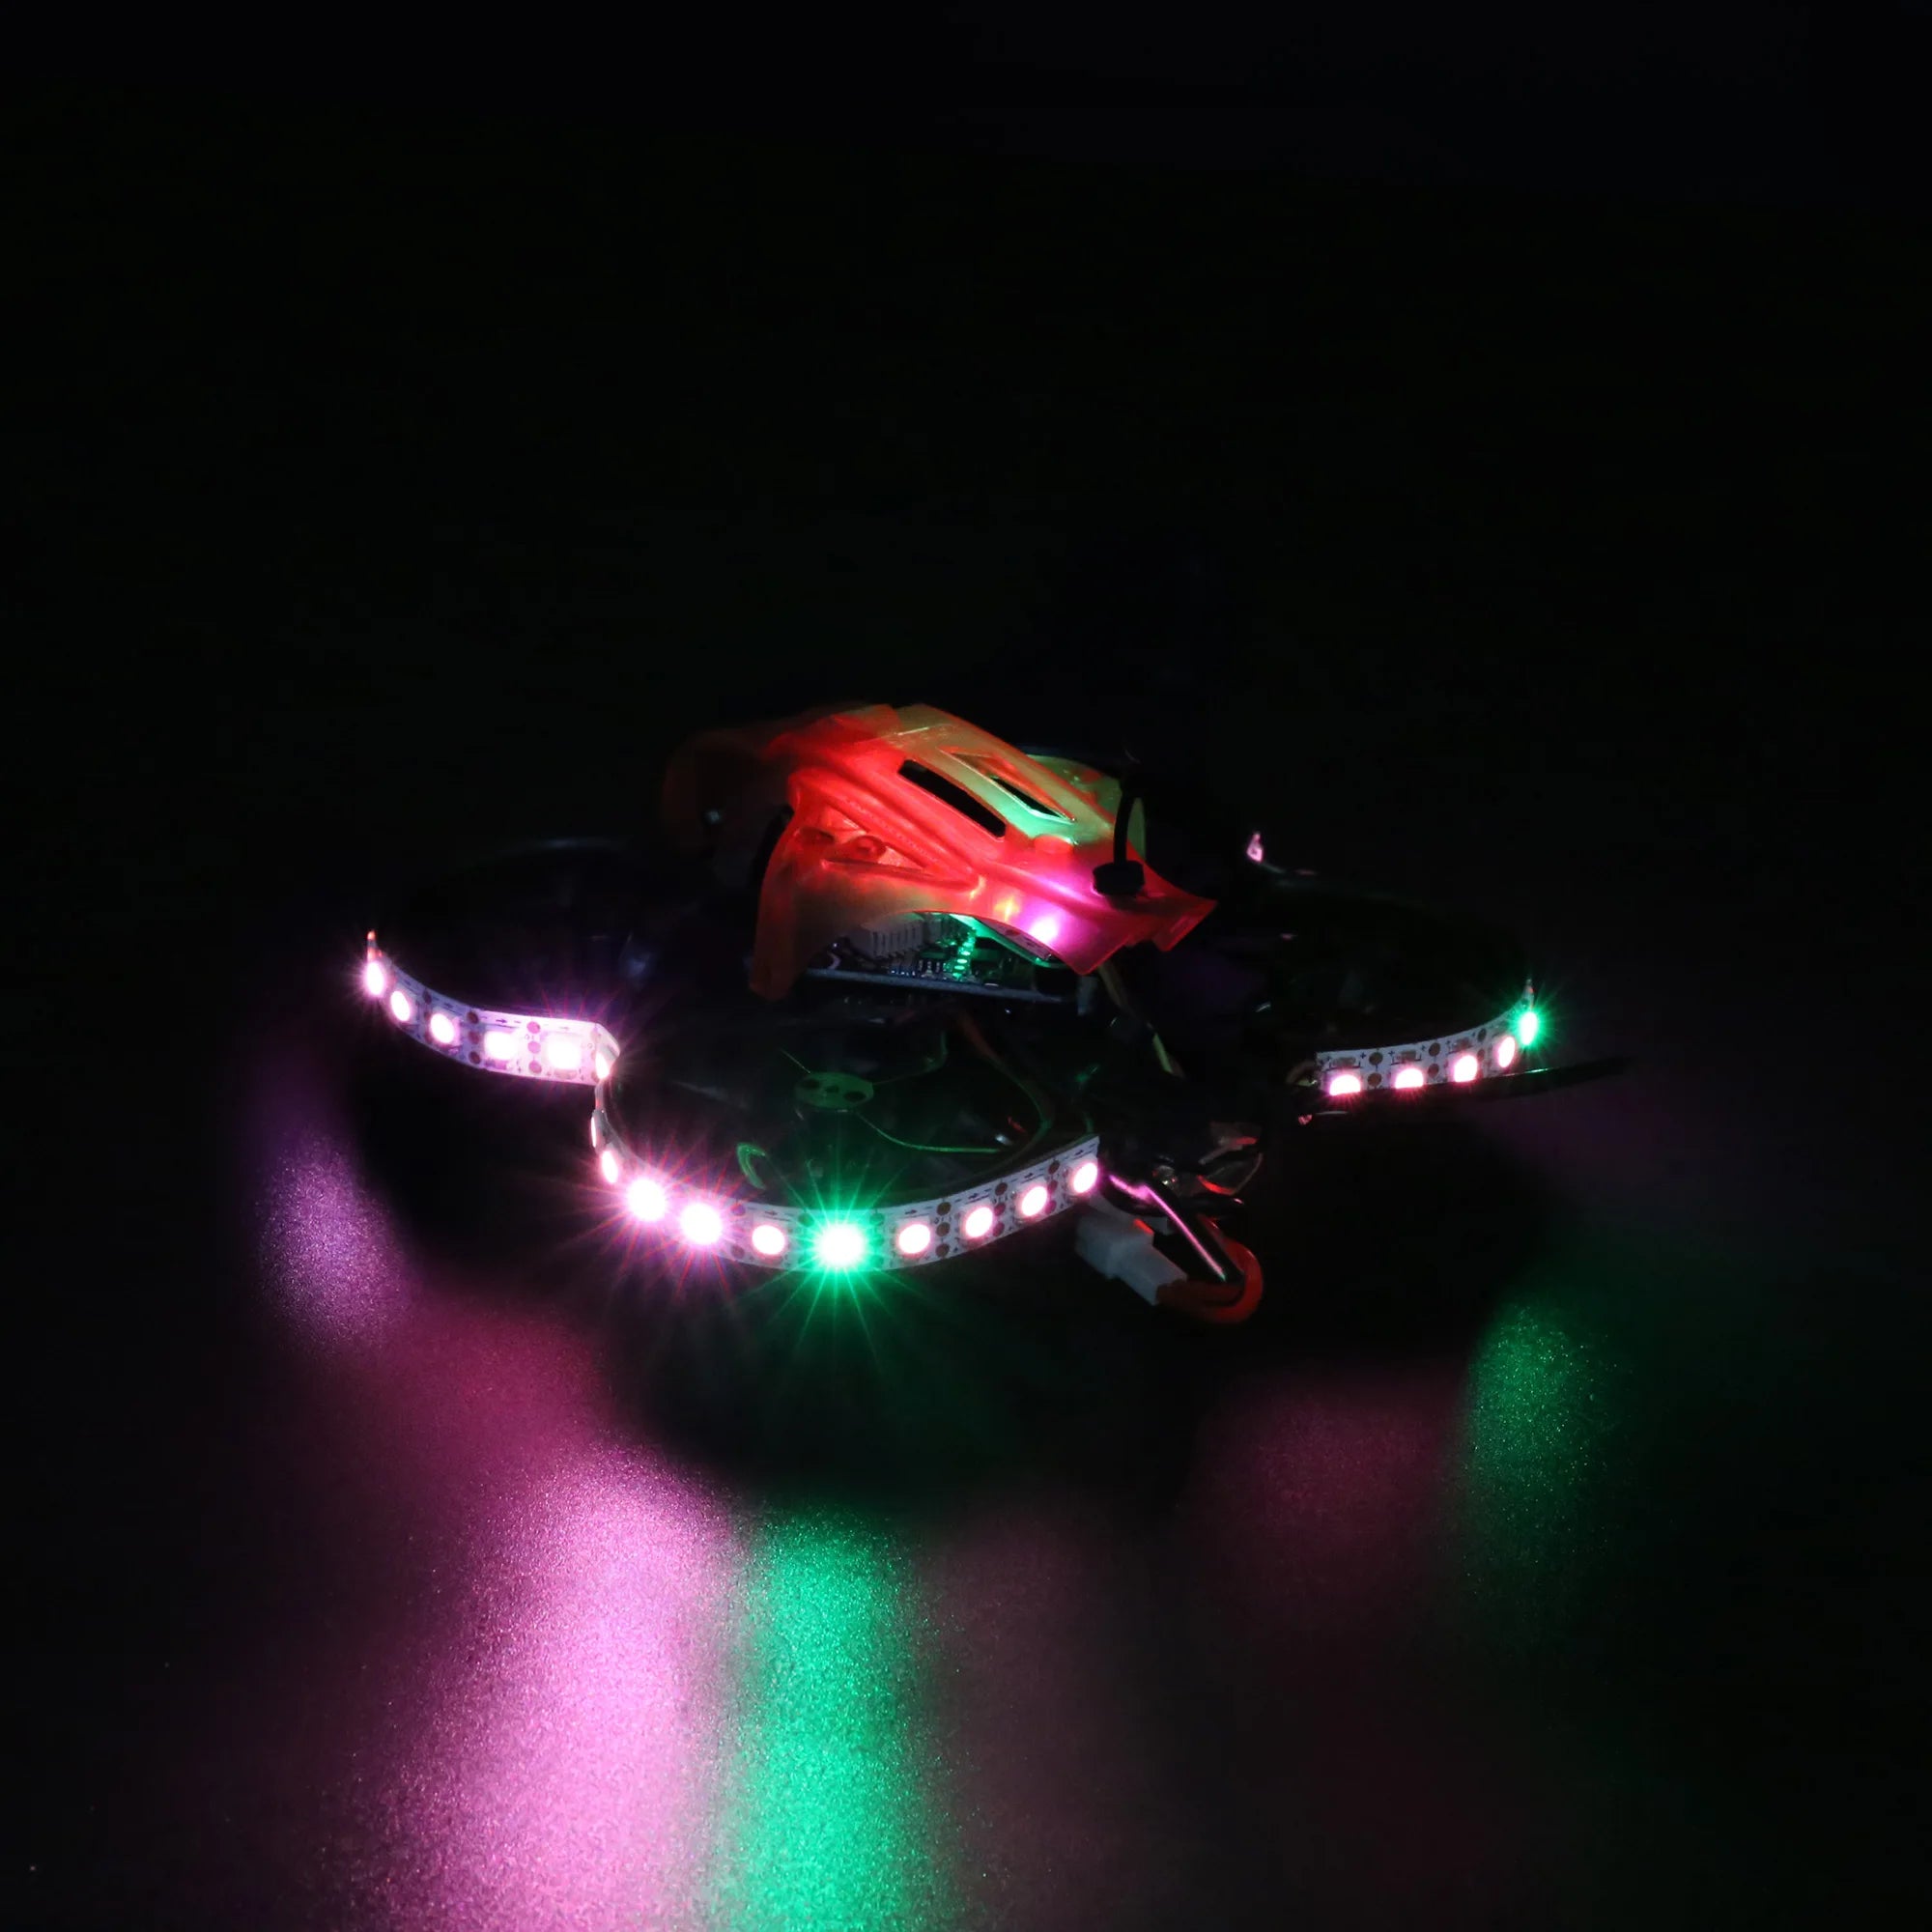 GEPRC TinyGO LED  Whoop RTF FPV Drone, the flight controller changed from GEP-12A-F4 to TAKER F411